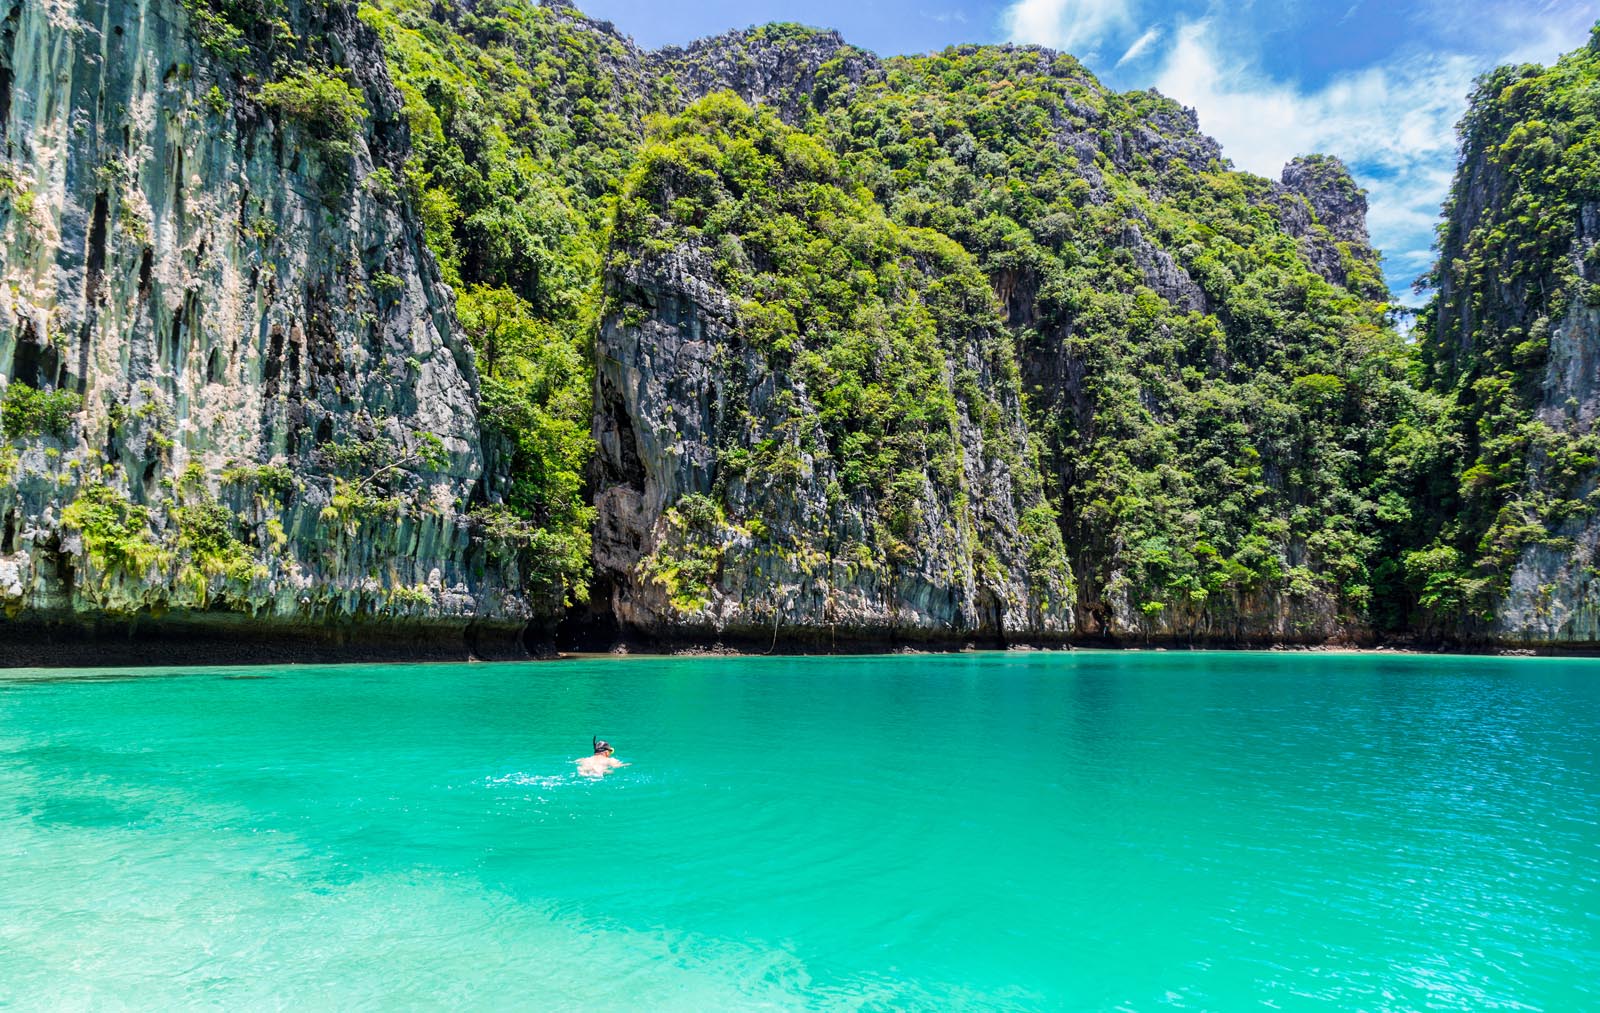 Snorkelling and diving aroung Koh Phi Phi are some of the most popular outdoor activities in Phuket